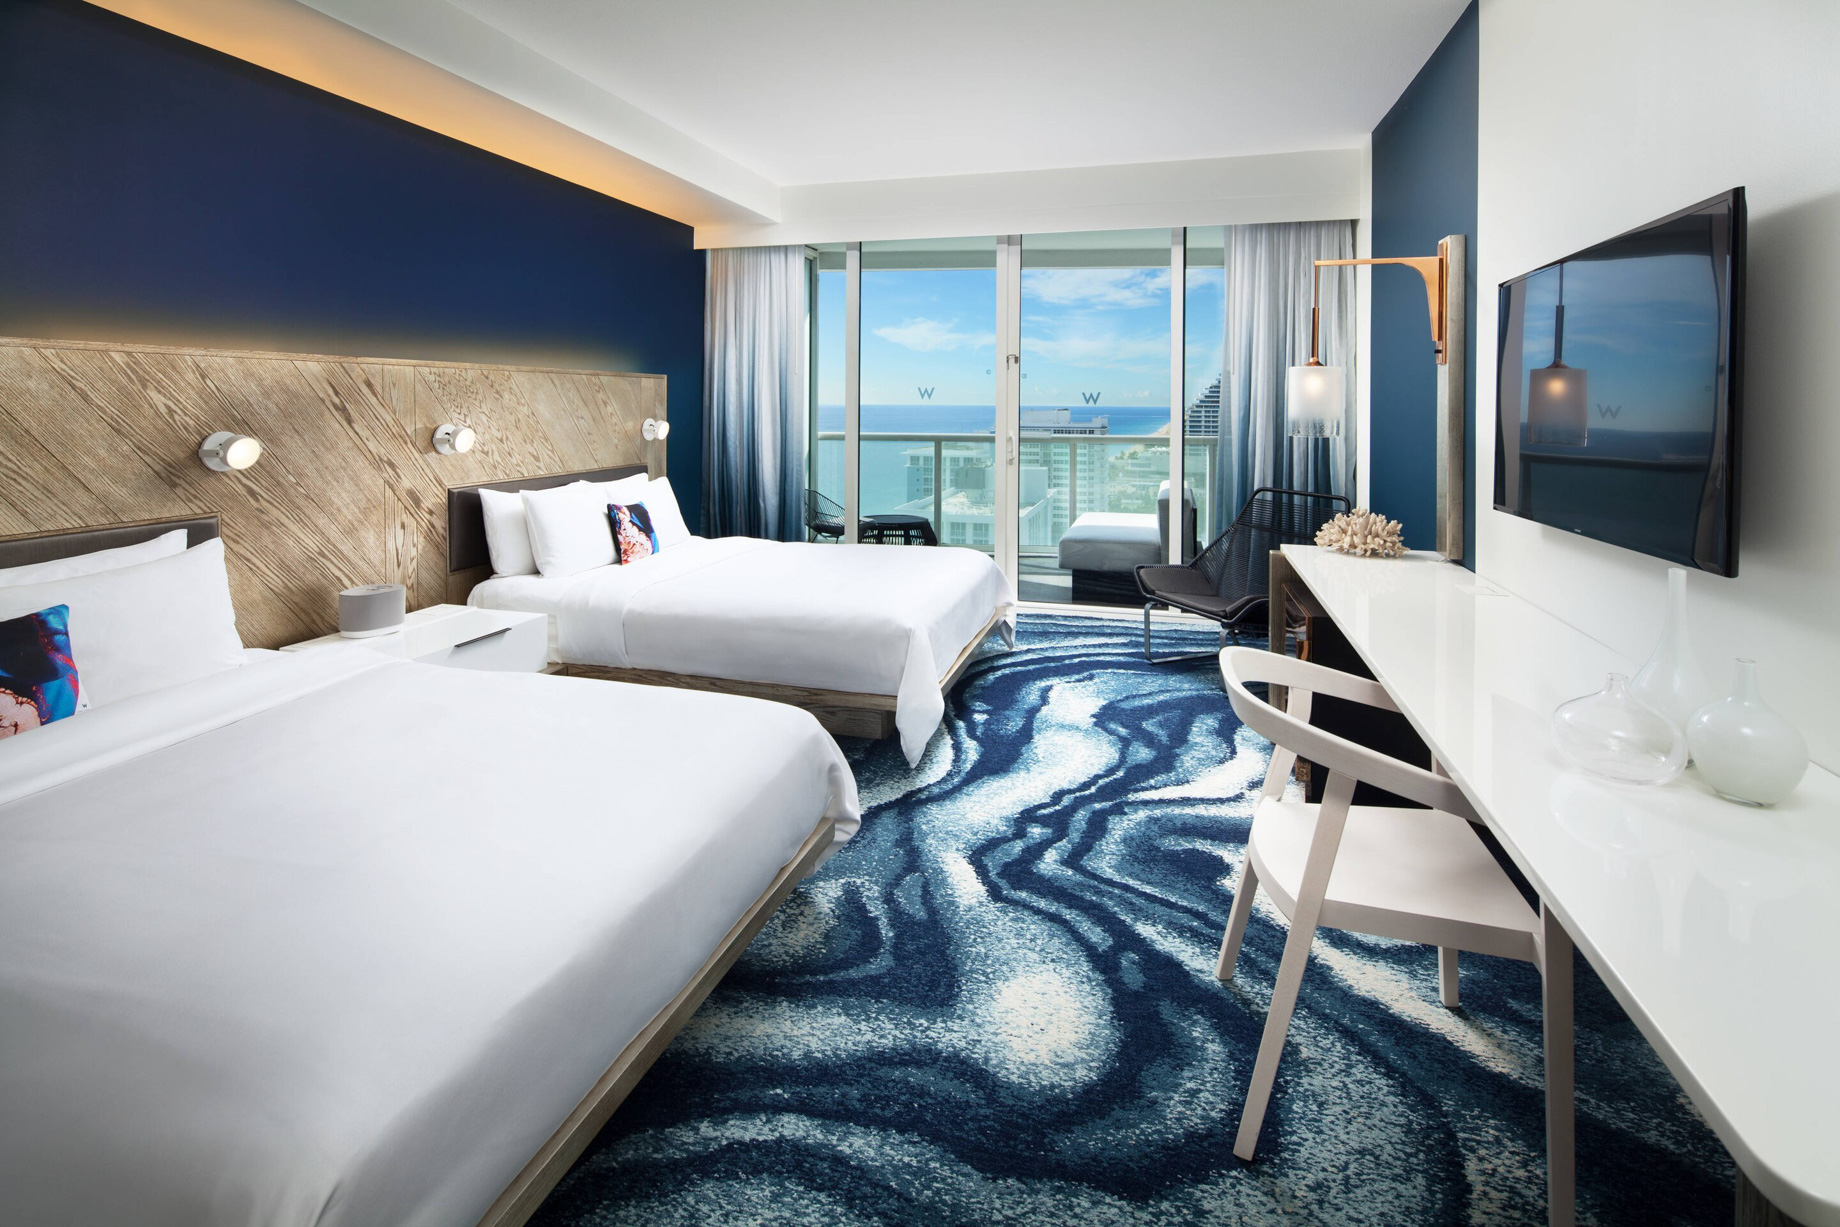 W Fort Lauderdale Hotel – Fort Lauderdale, FL, USA – Spectacular Ocean View Queen Guest Room